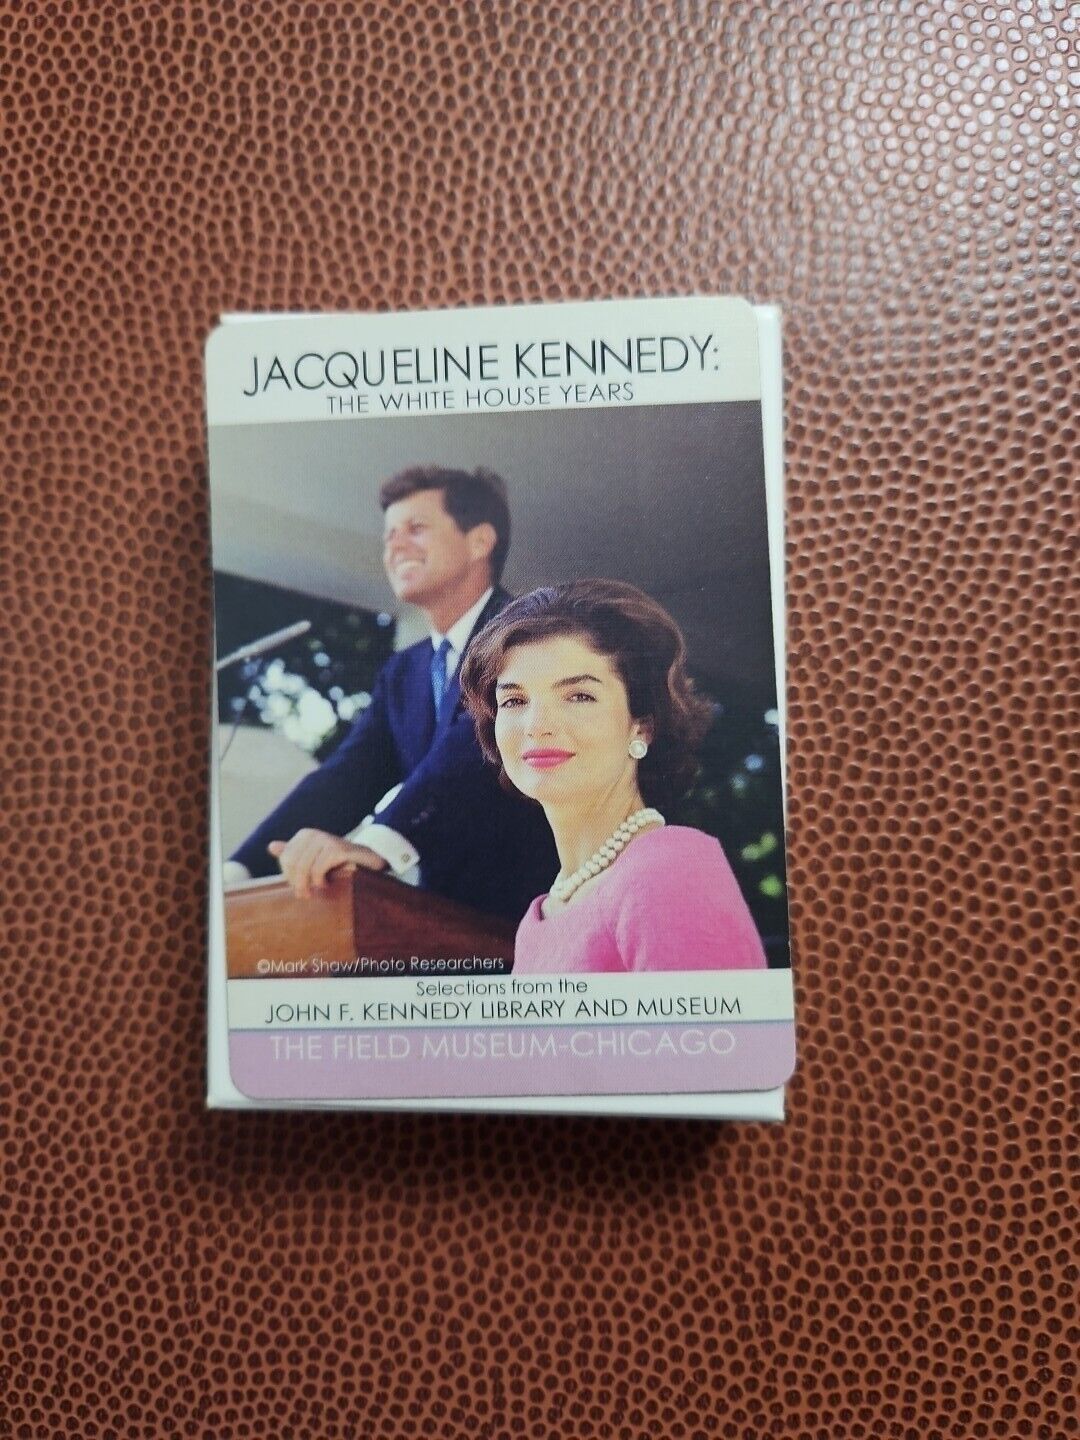 RARE NEW - JACKIE JACQUELINE KENNEDY PLAYING CARDS DECK - THE WHITE HOUSE YEARS 